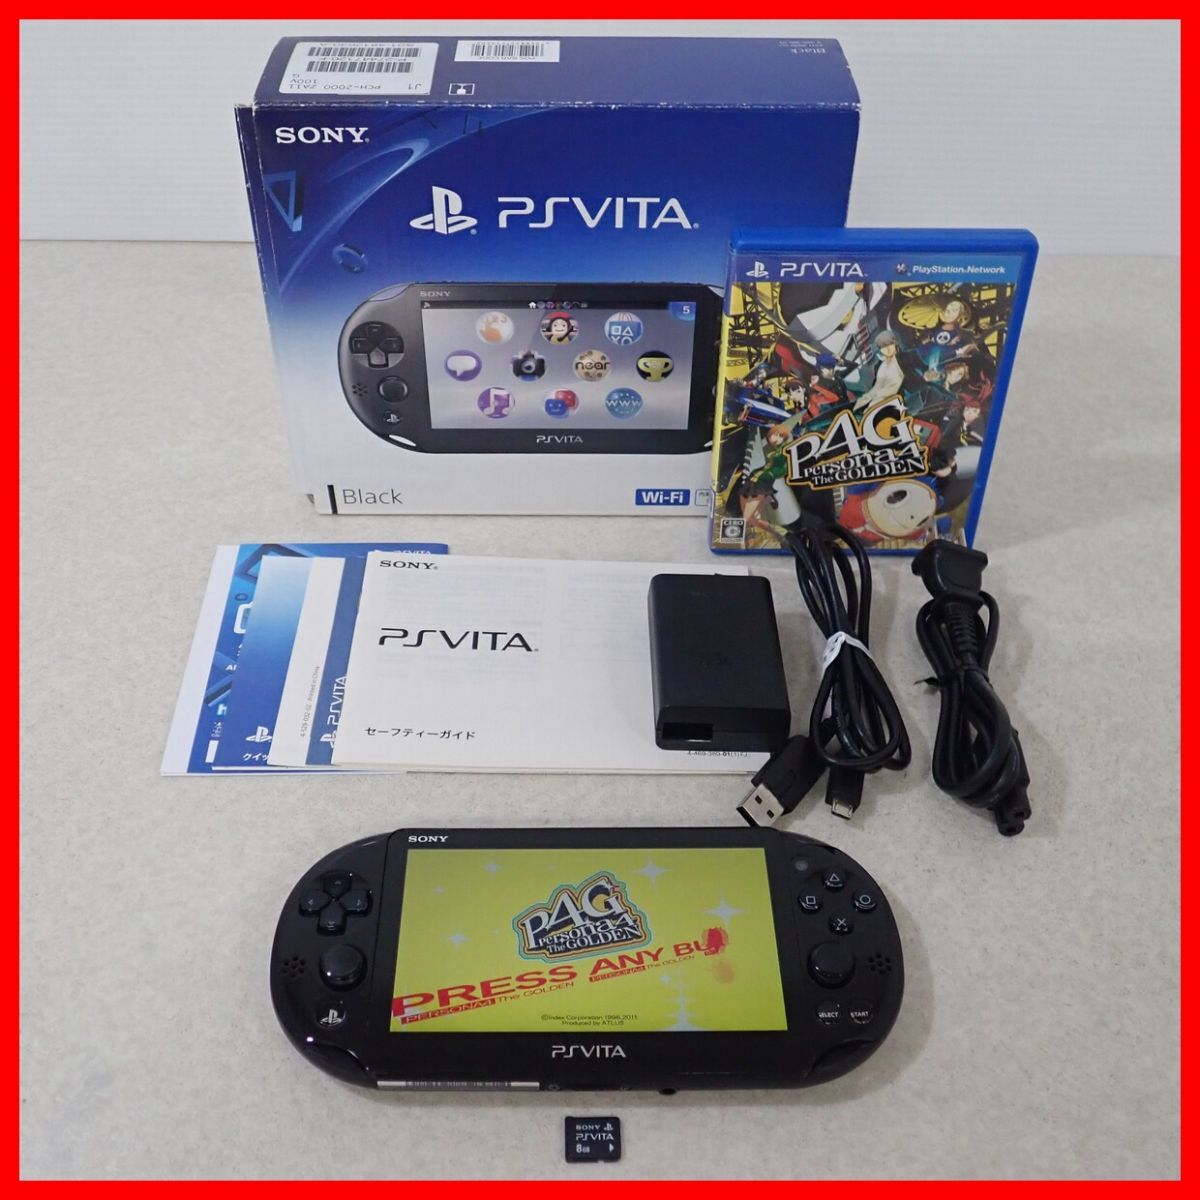  operation goods PSVITA PlayStation * Vita body PCH-2000 box opinion attaching + exclusive use memory card 8GB + soft Persona 4 The * Golden [10